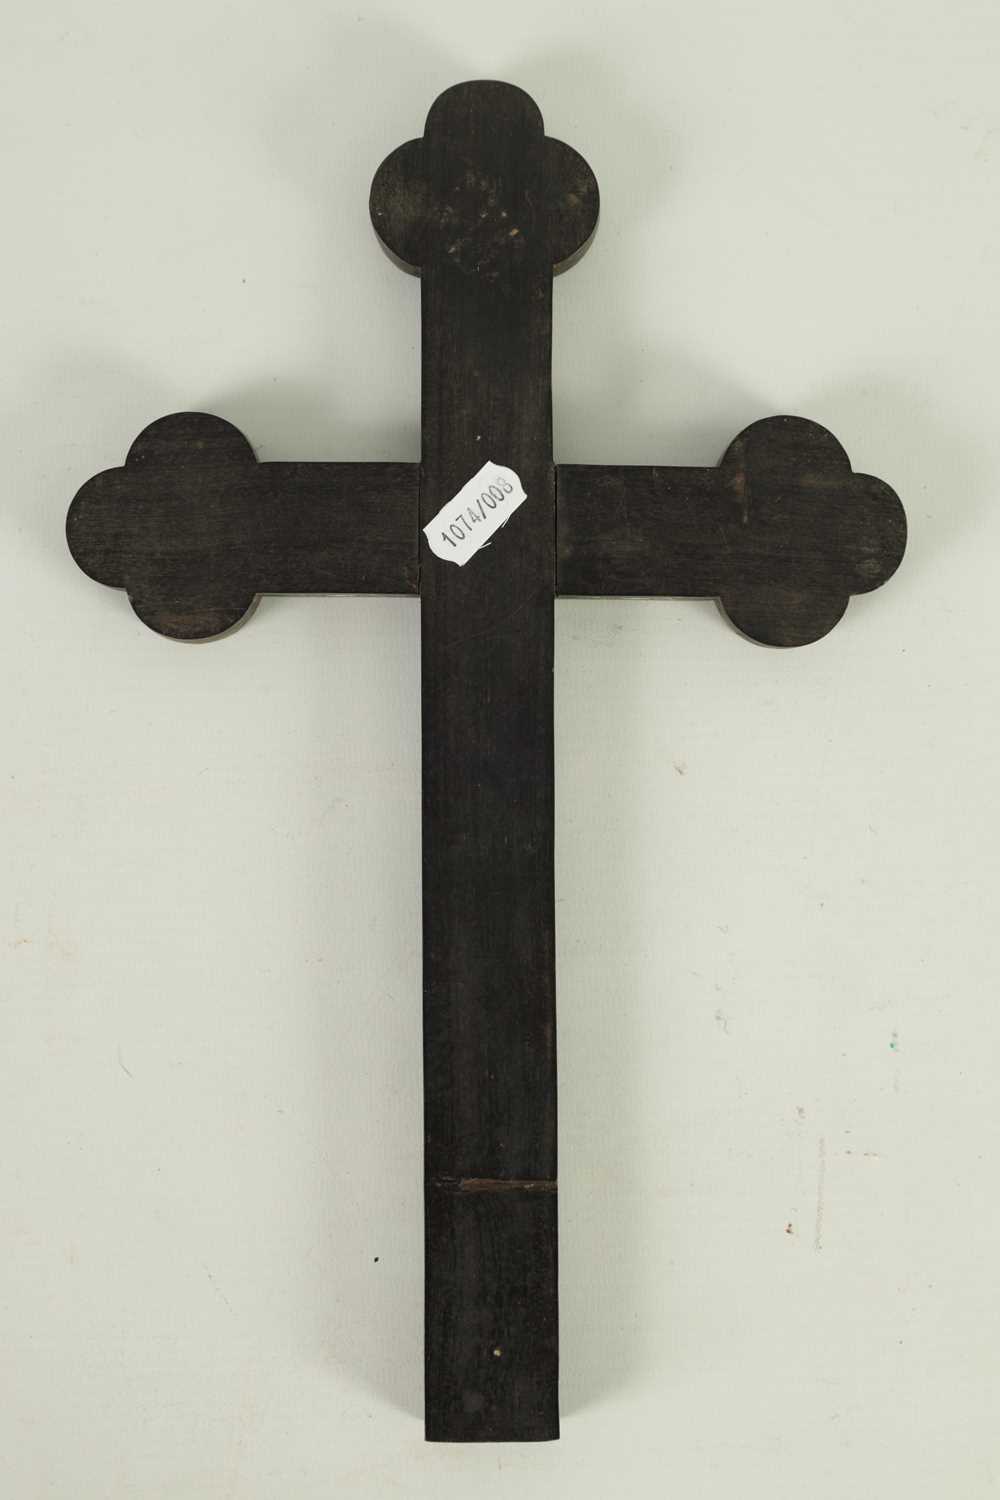 A FINE 18TH/19TH CENTURY CHINESE MOTHER OF PEARL INLAID HARDWOOD APOSTLE CROSS - Image 10 of 11